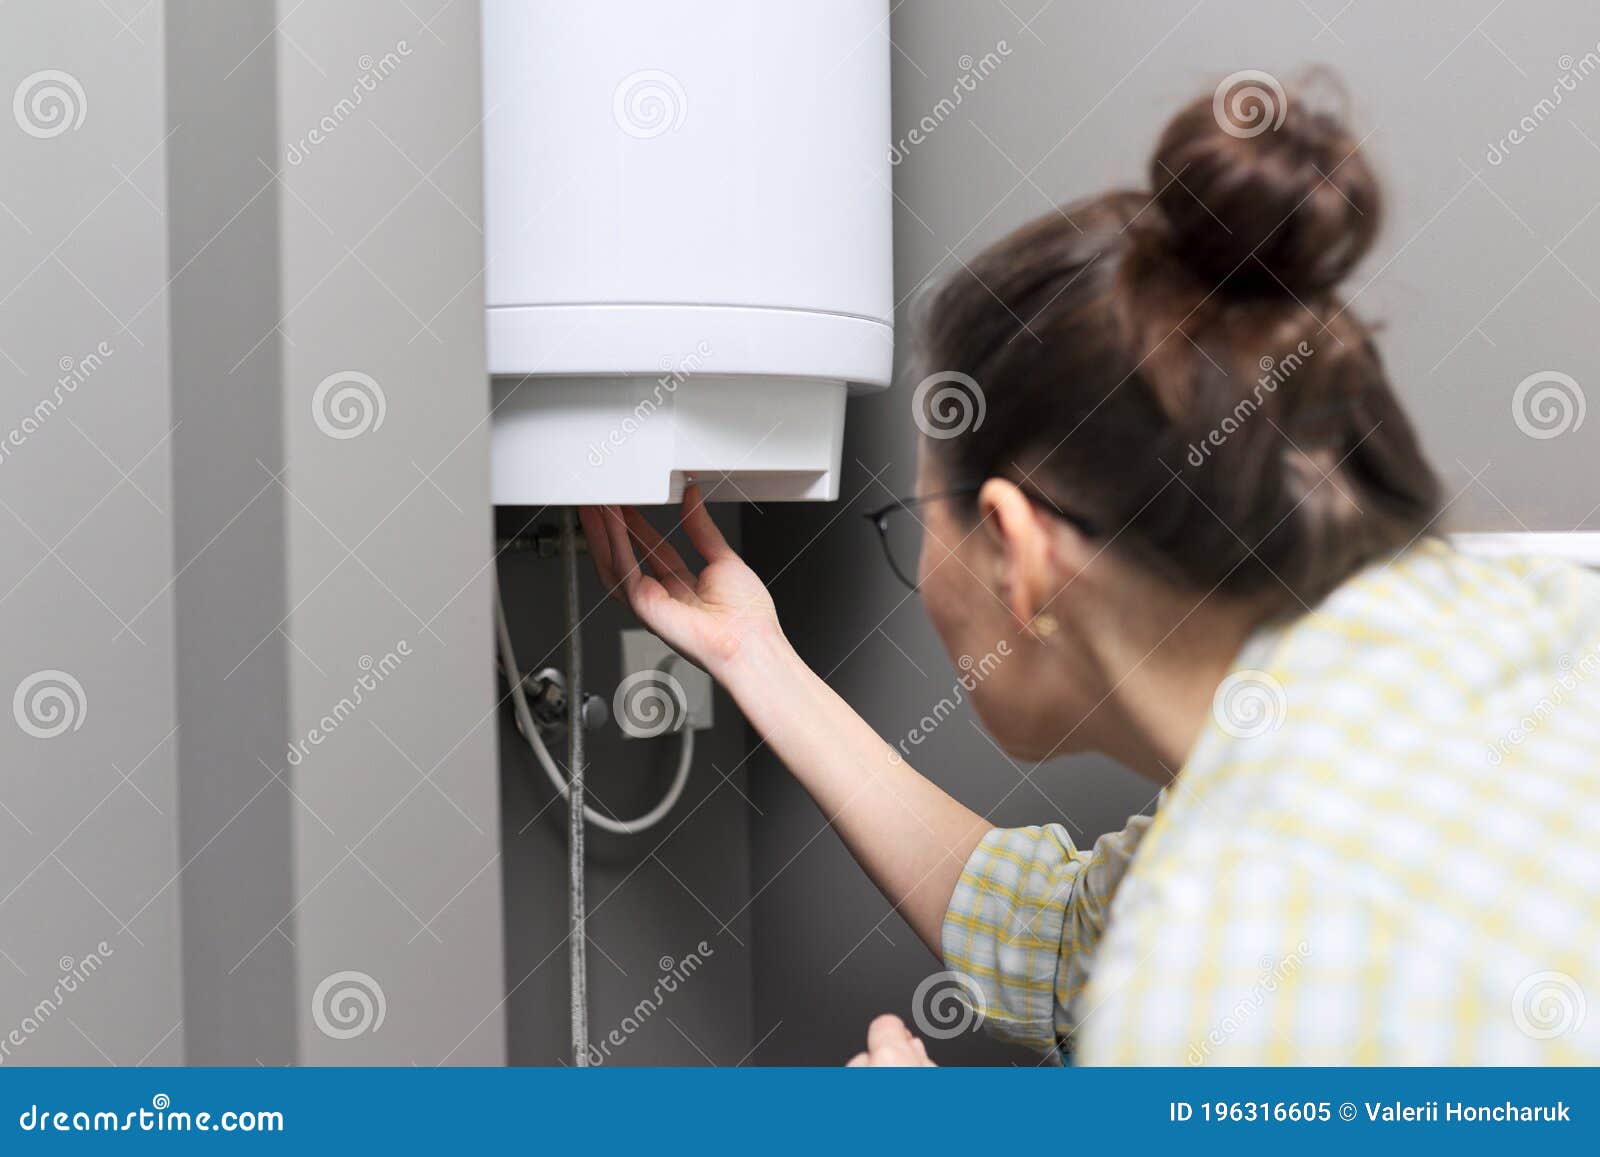 home water heater, woman regulates the temperature on an electric water heater